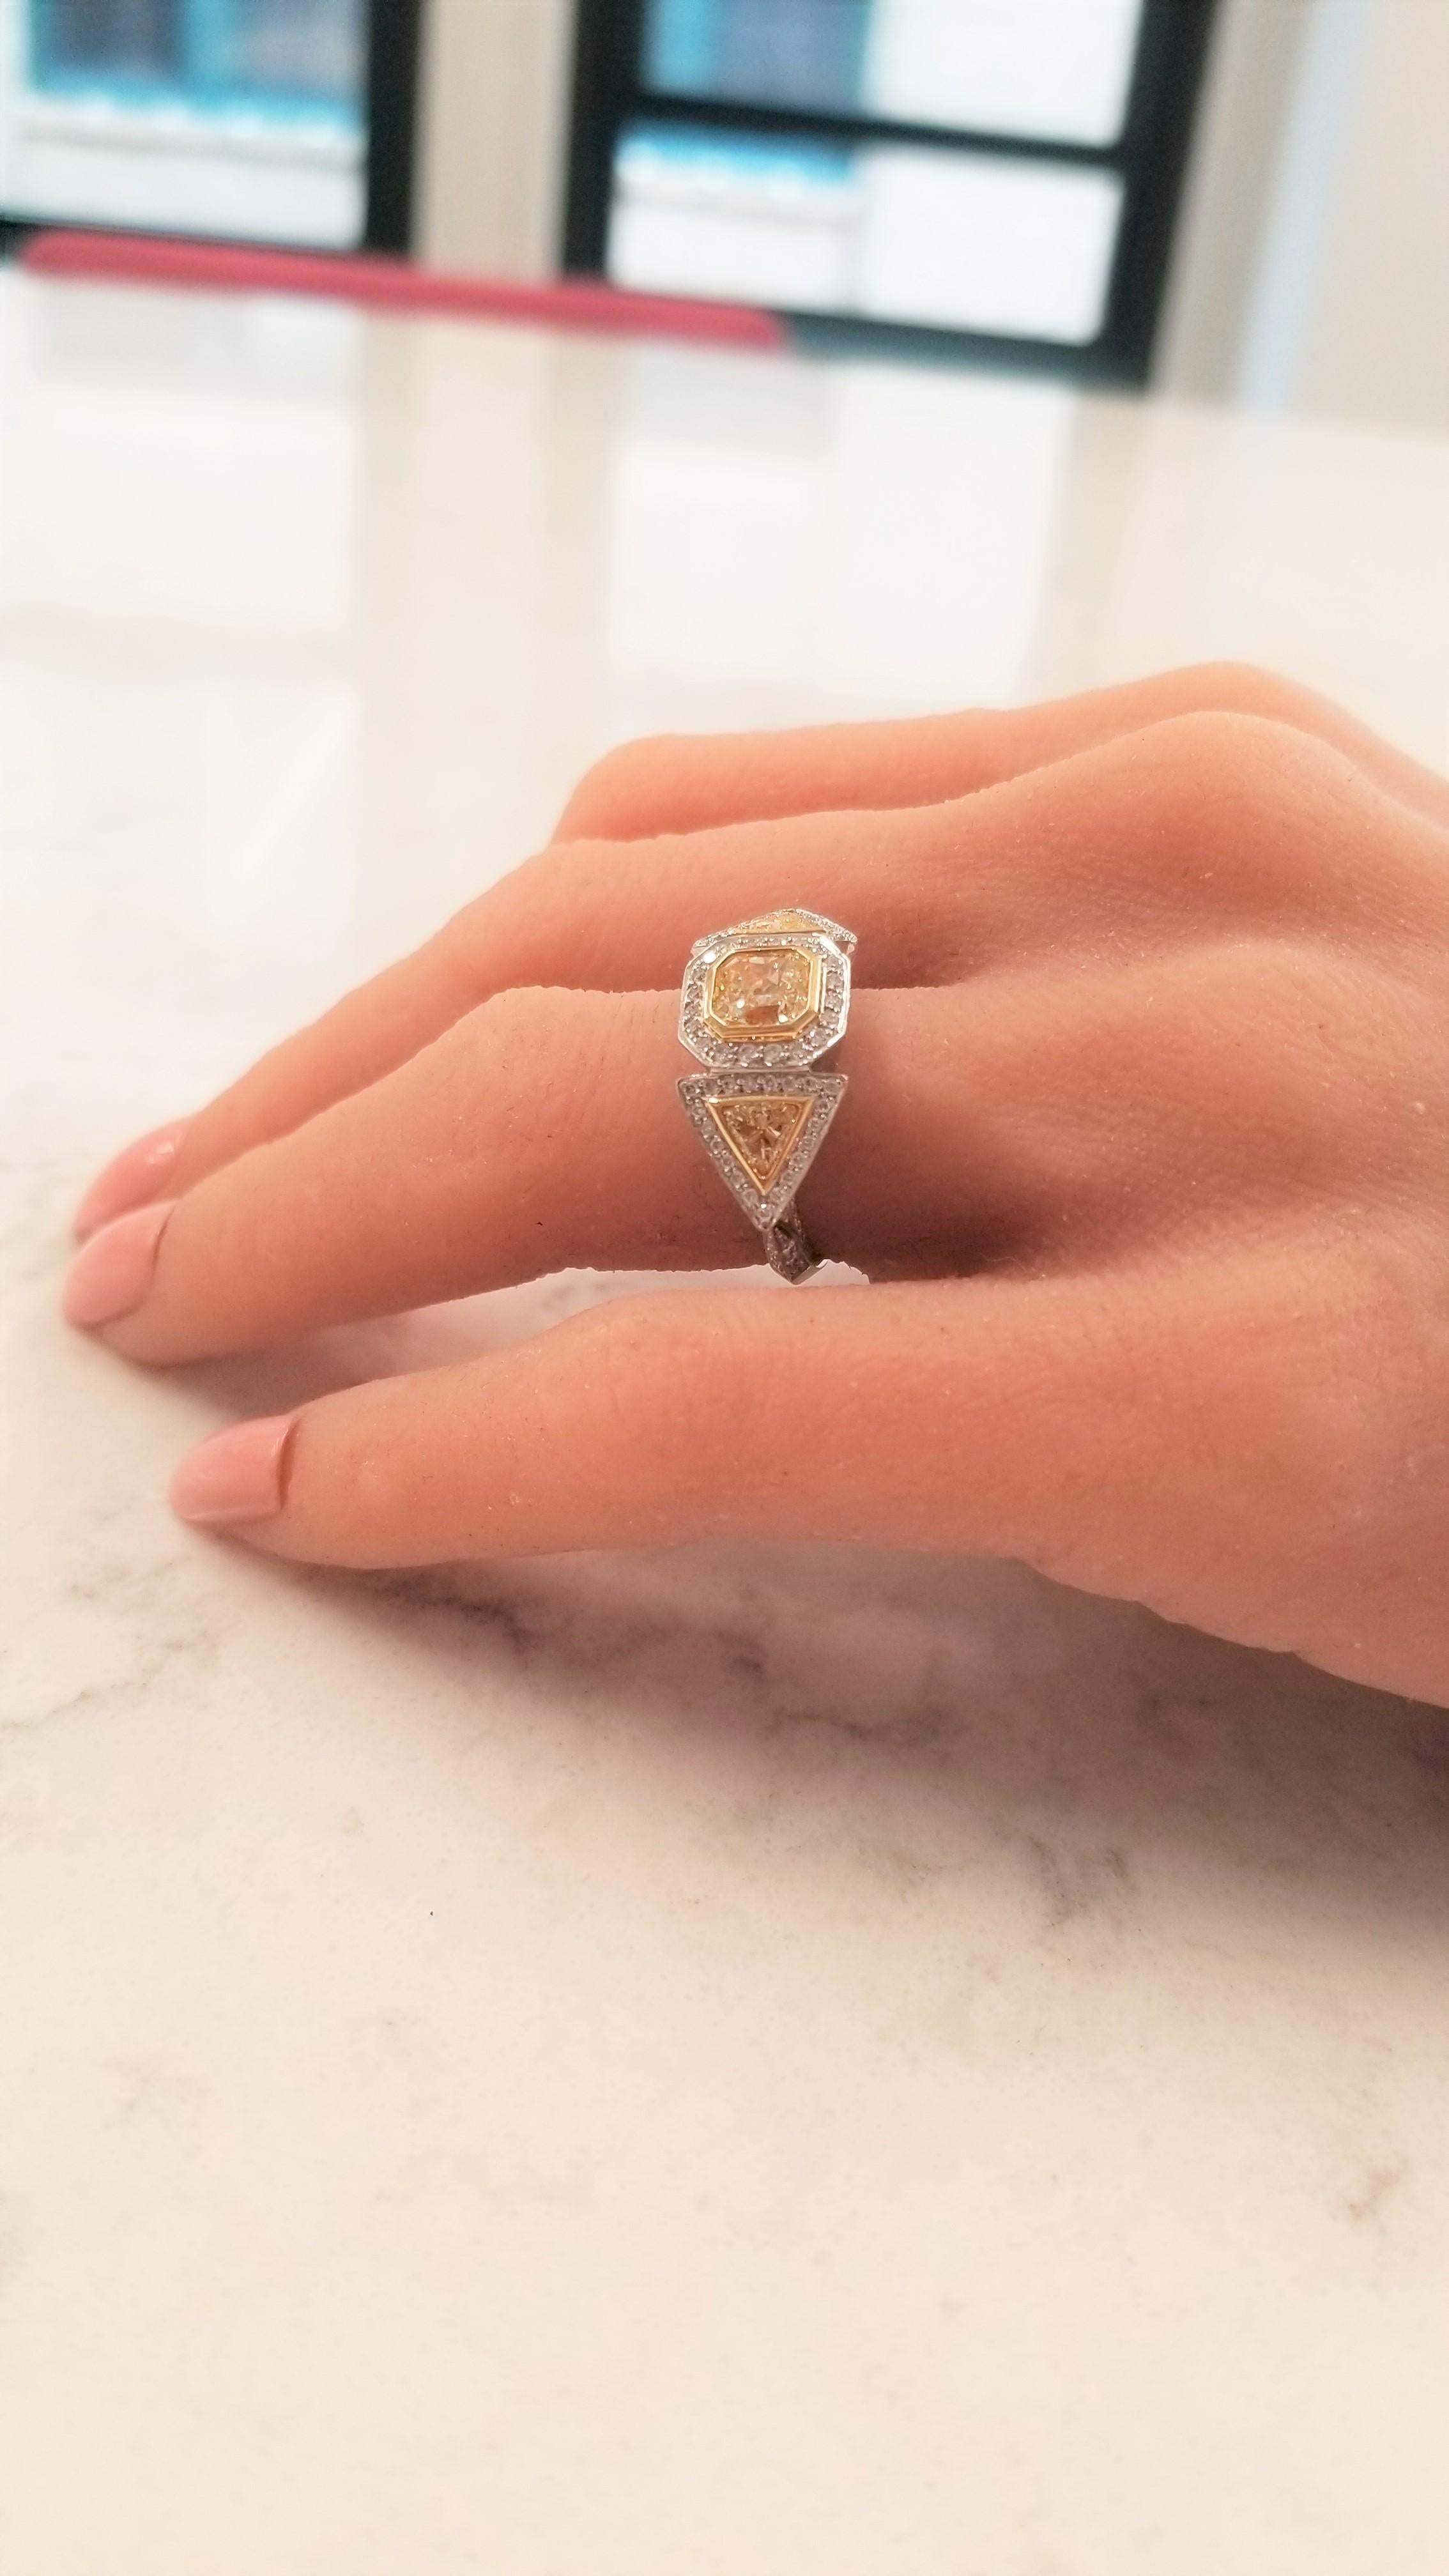 This architecturally inspired ring is spectacular from every angle! The intricate design elements fashioned in platinum and 18 Karat yellow gold add drama and elegance. The illuminating 1.21 Carat square-radiant intense yellow diamond center makes